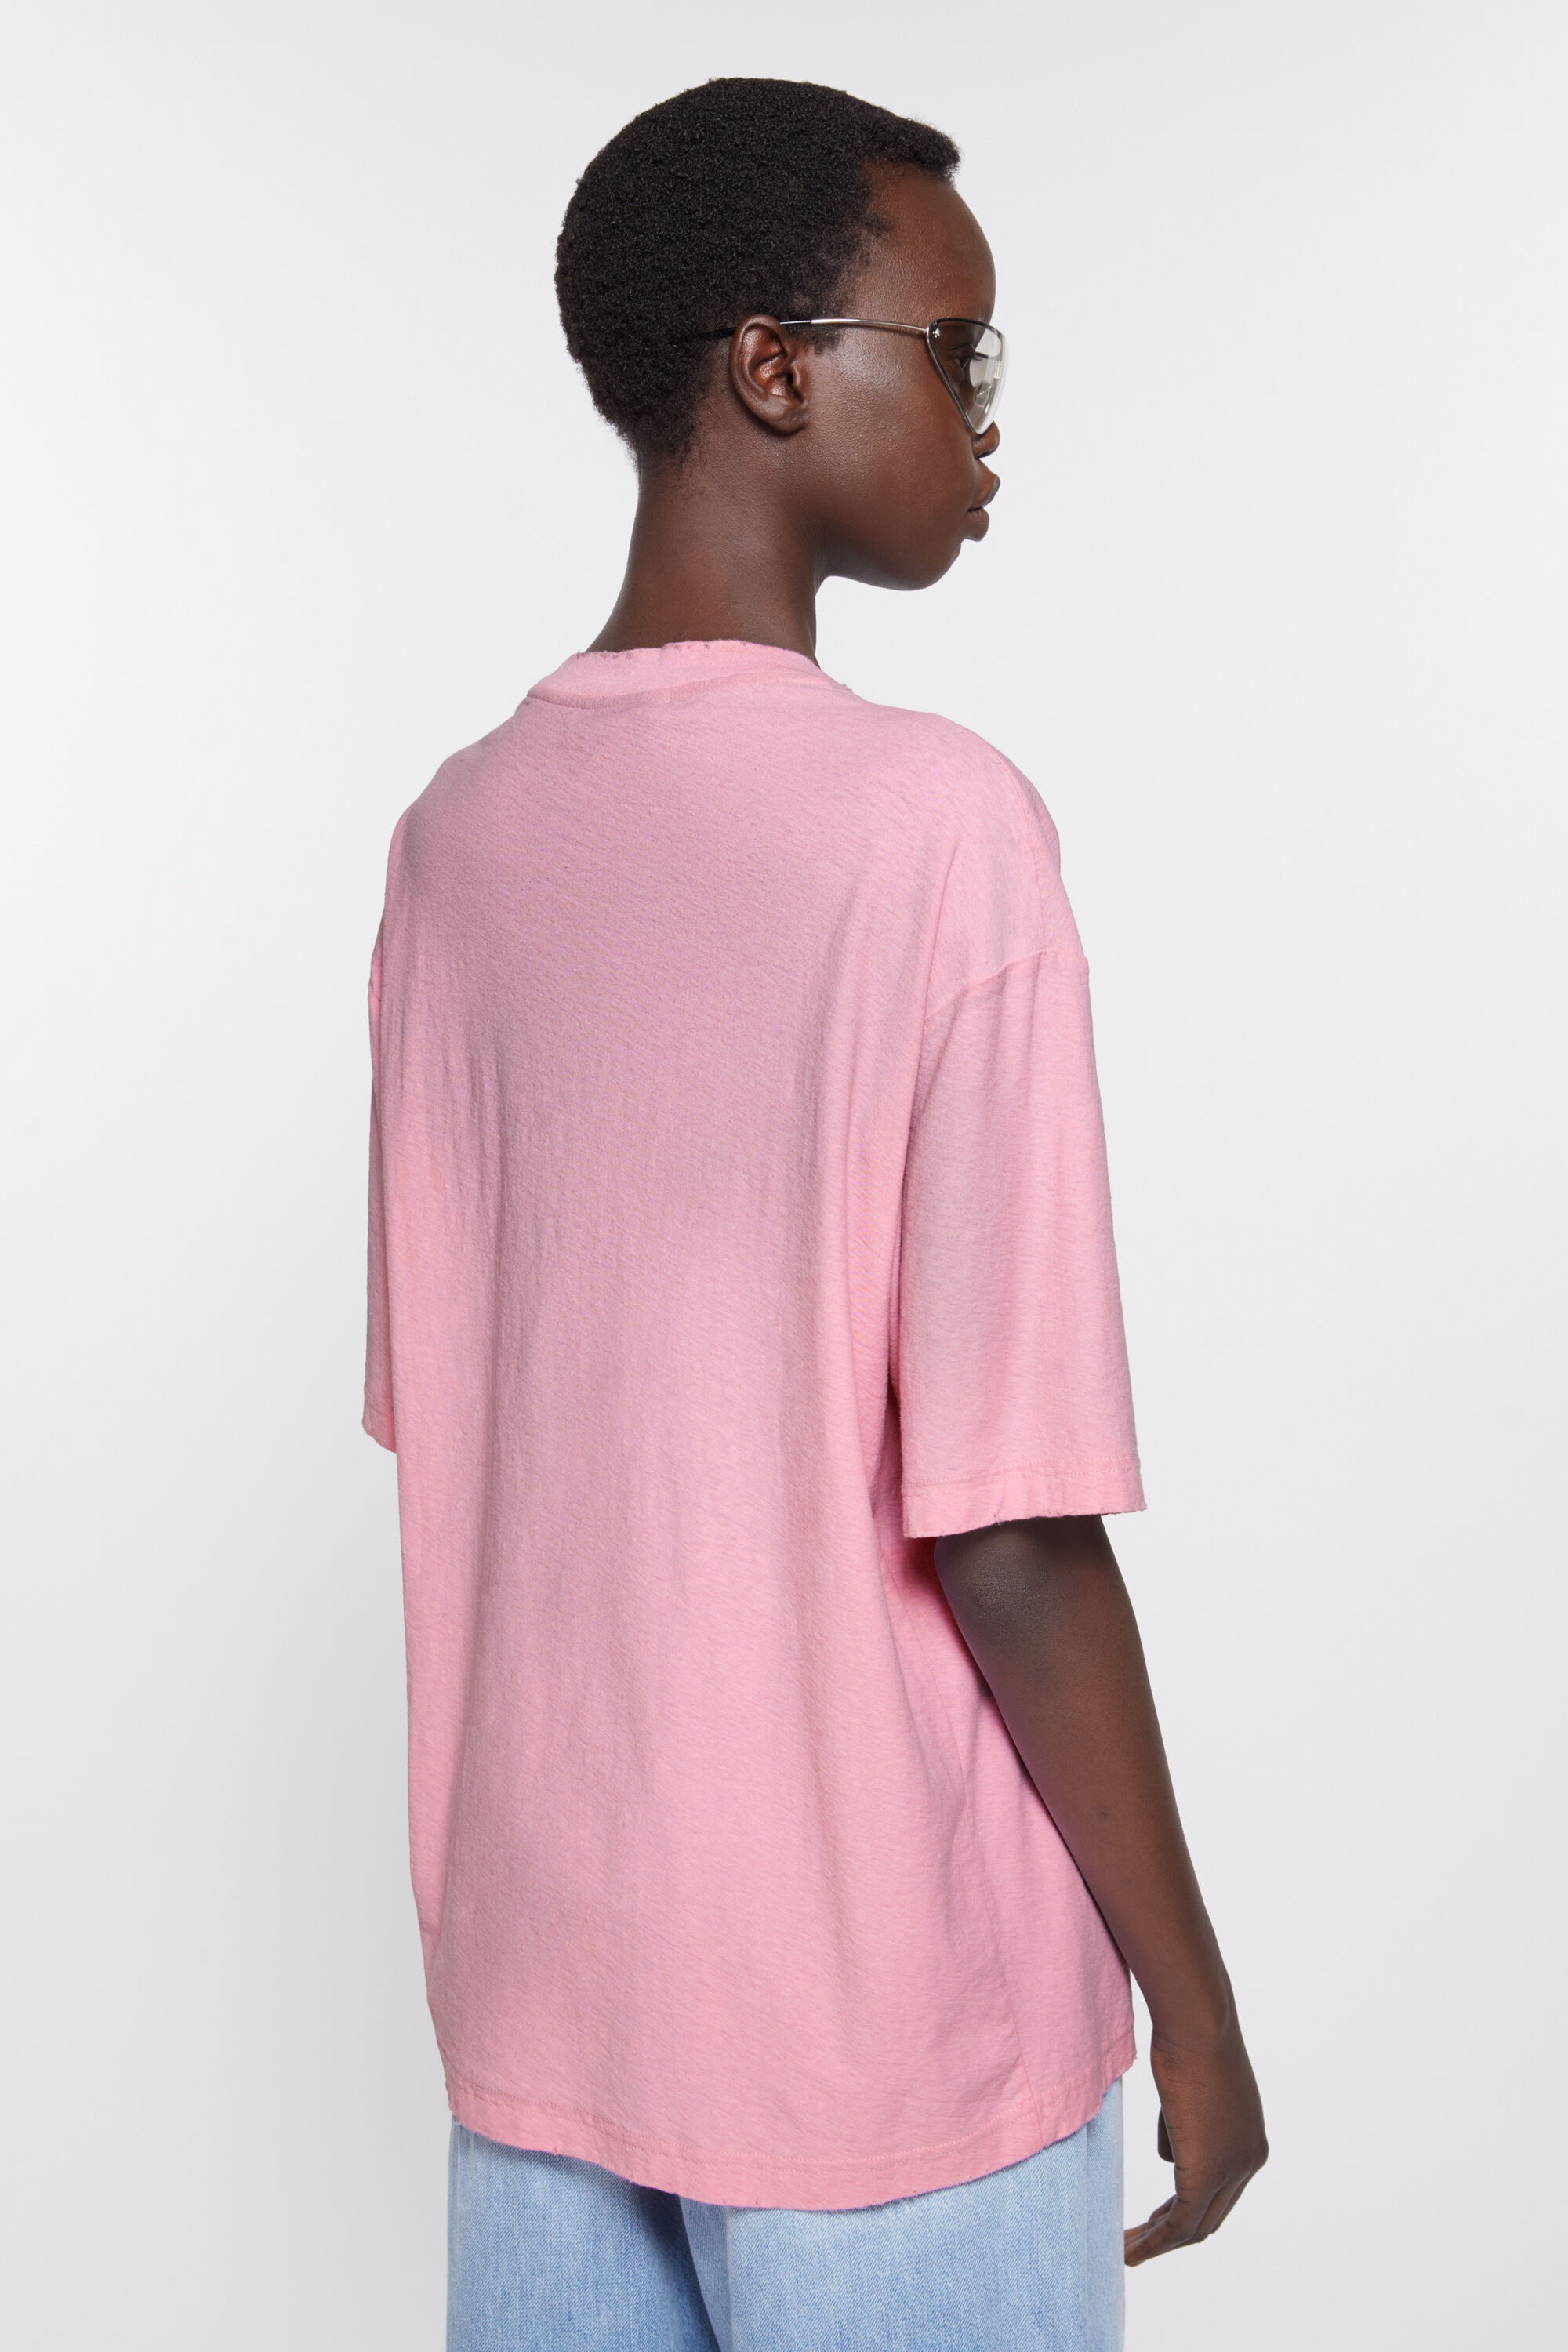 Logo t-shirt - Relaxed fit - Cotton candy pink - 3